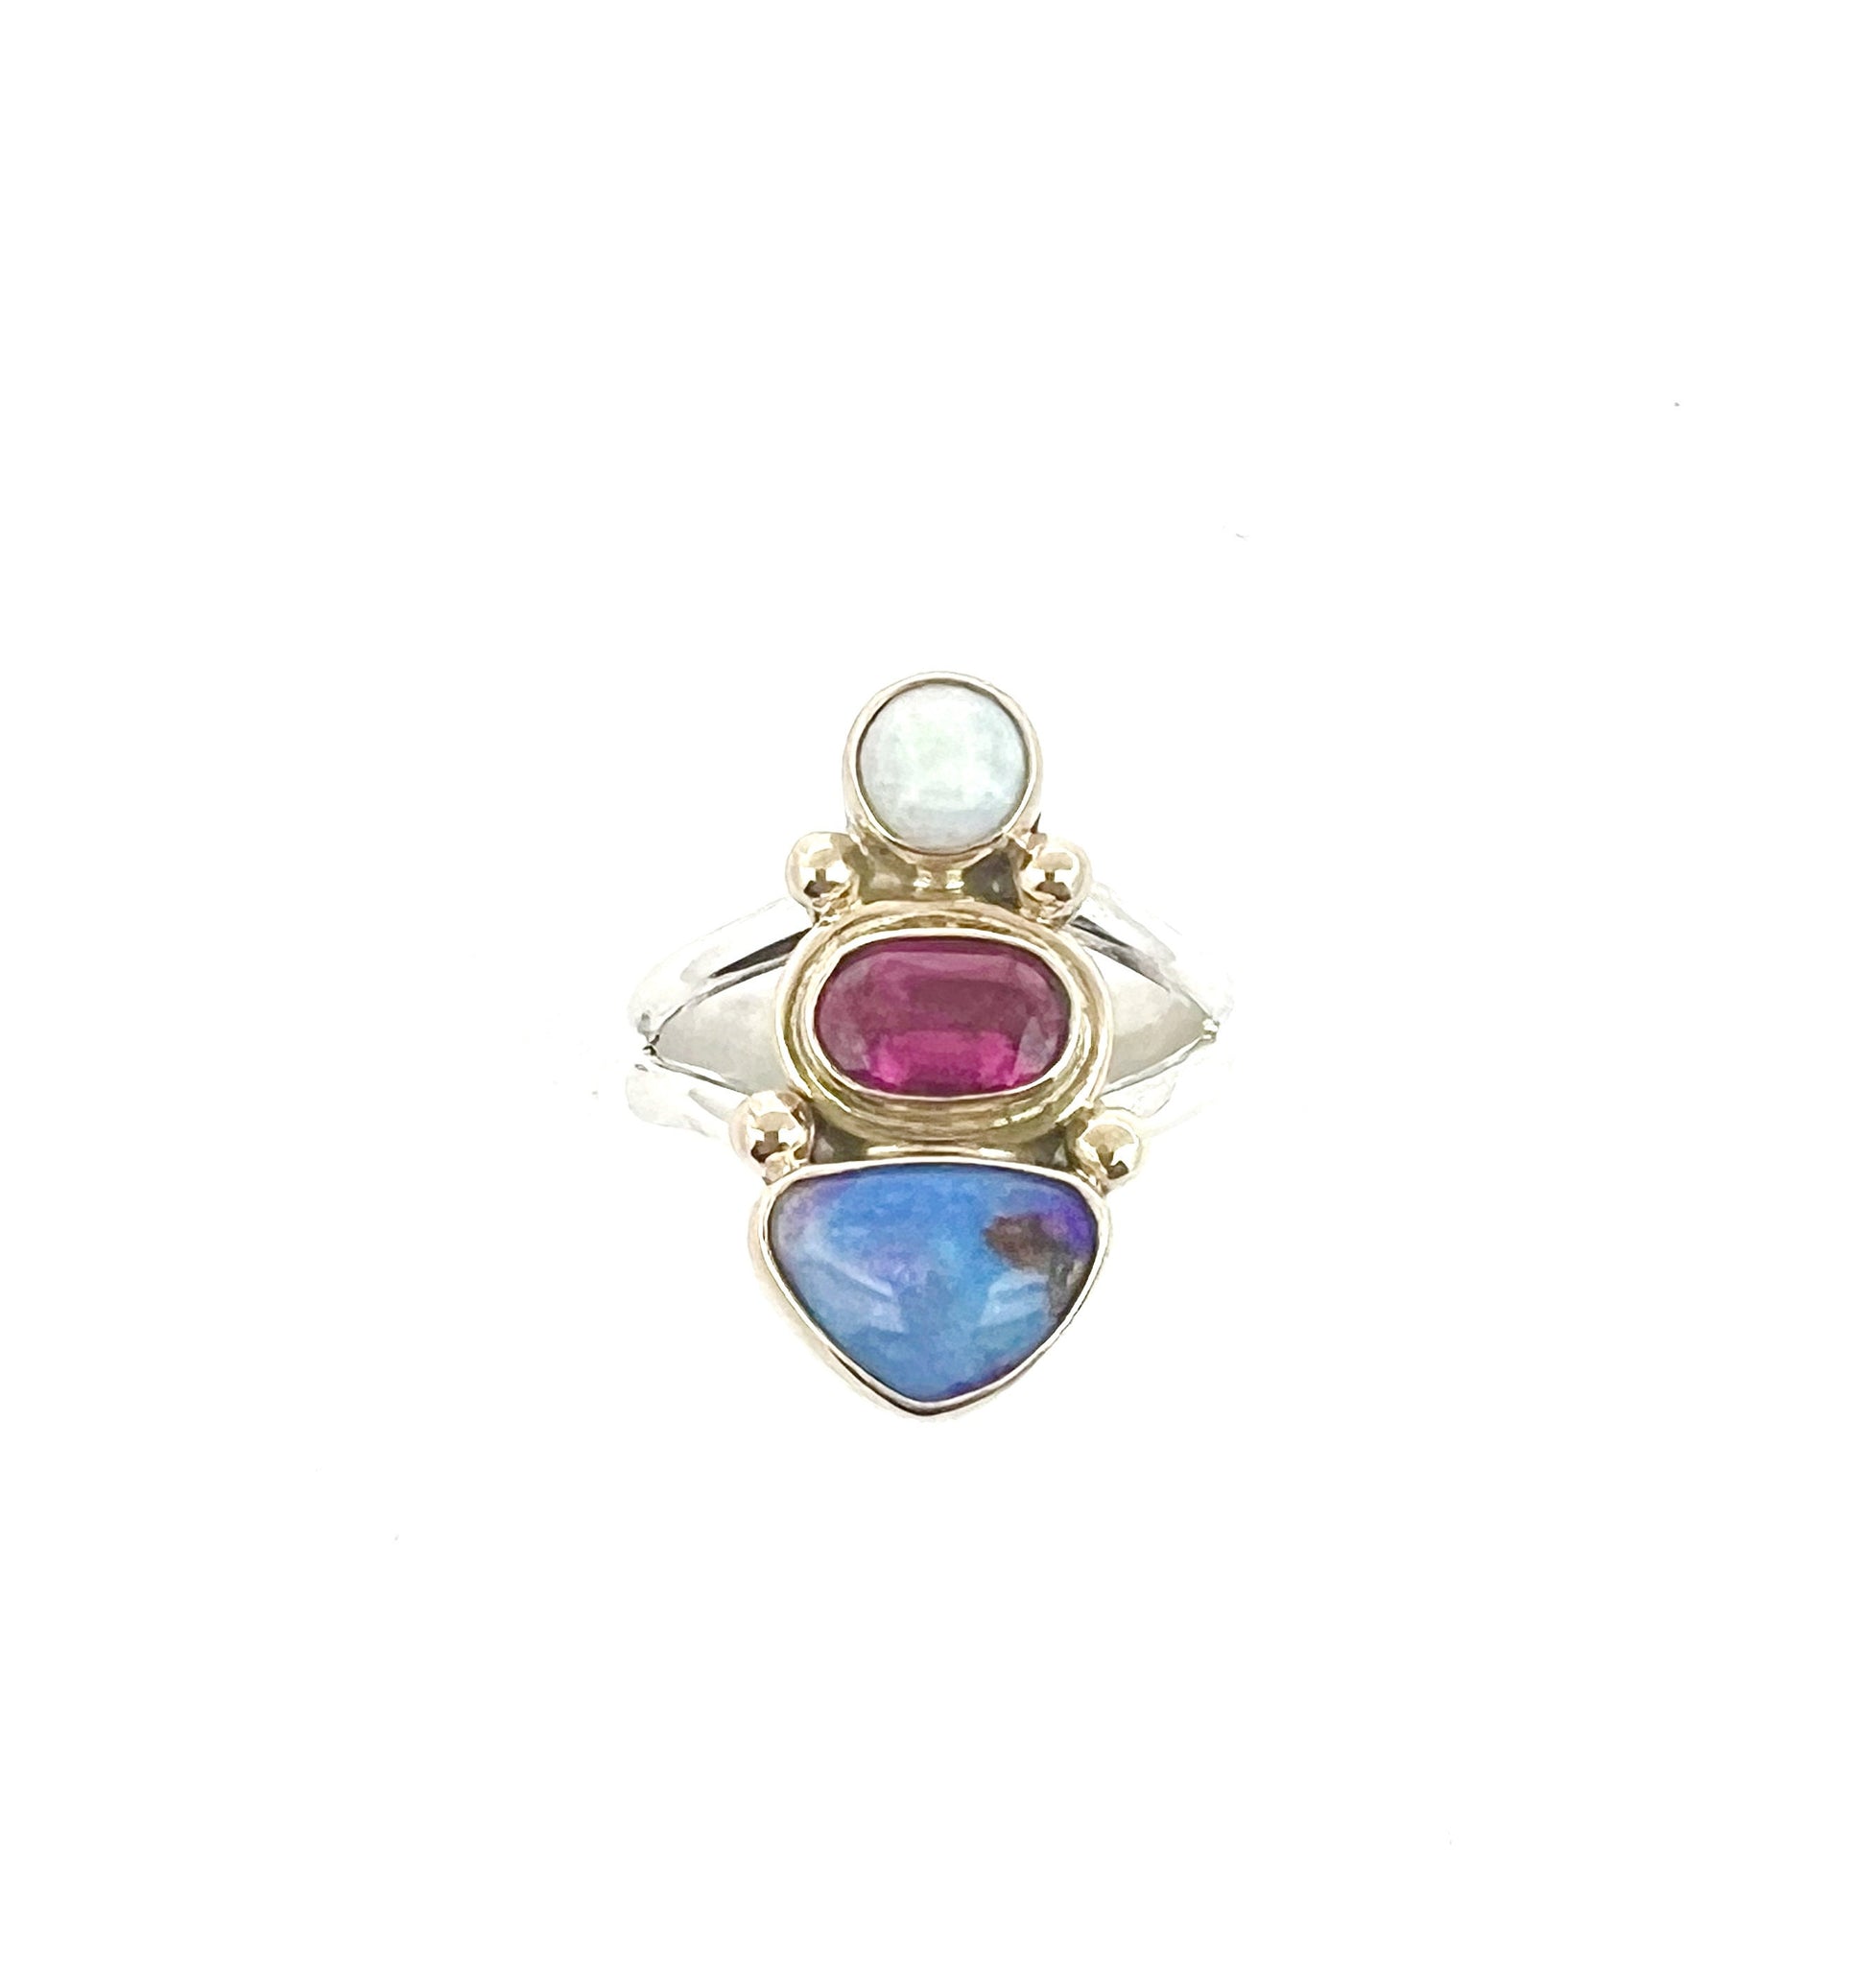 Australian Opal, Pink Tourmaline and Ethiopian Opal in 14k Gold and Sterling Silver, Opal Statement Ring